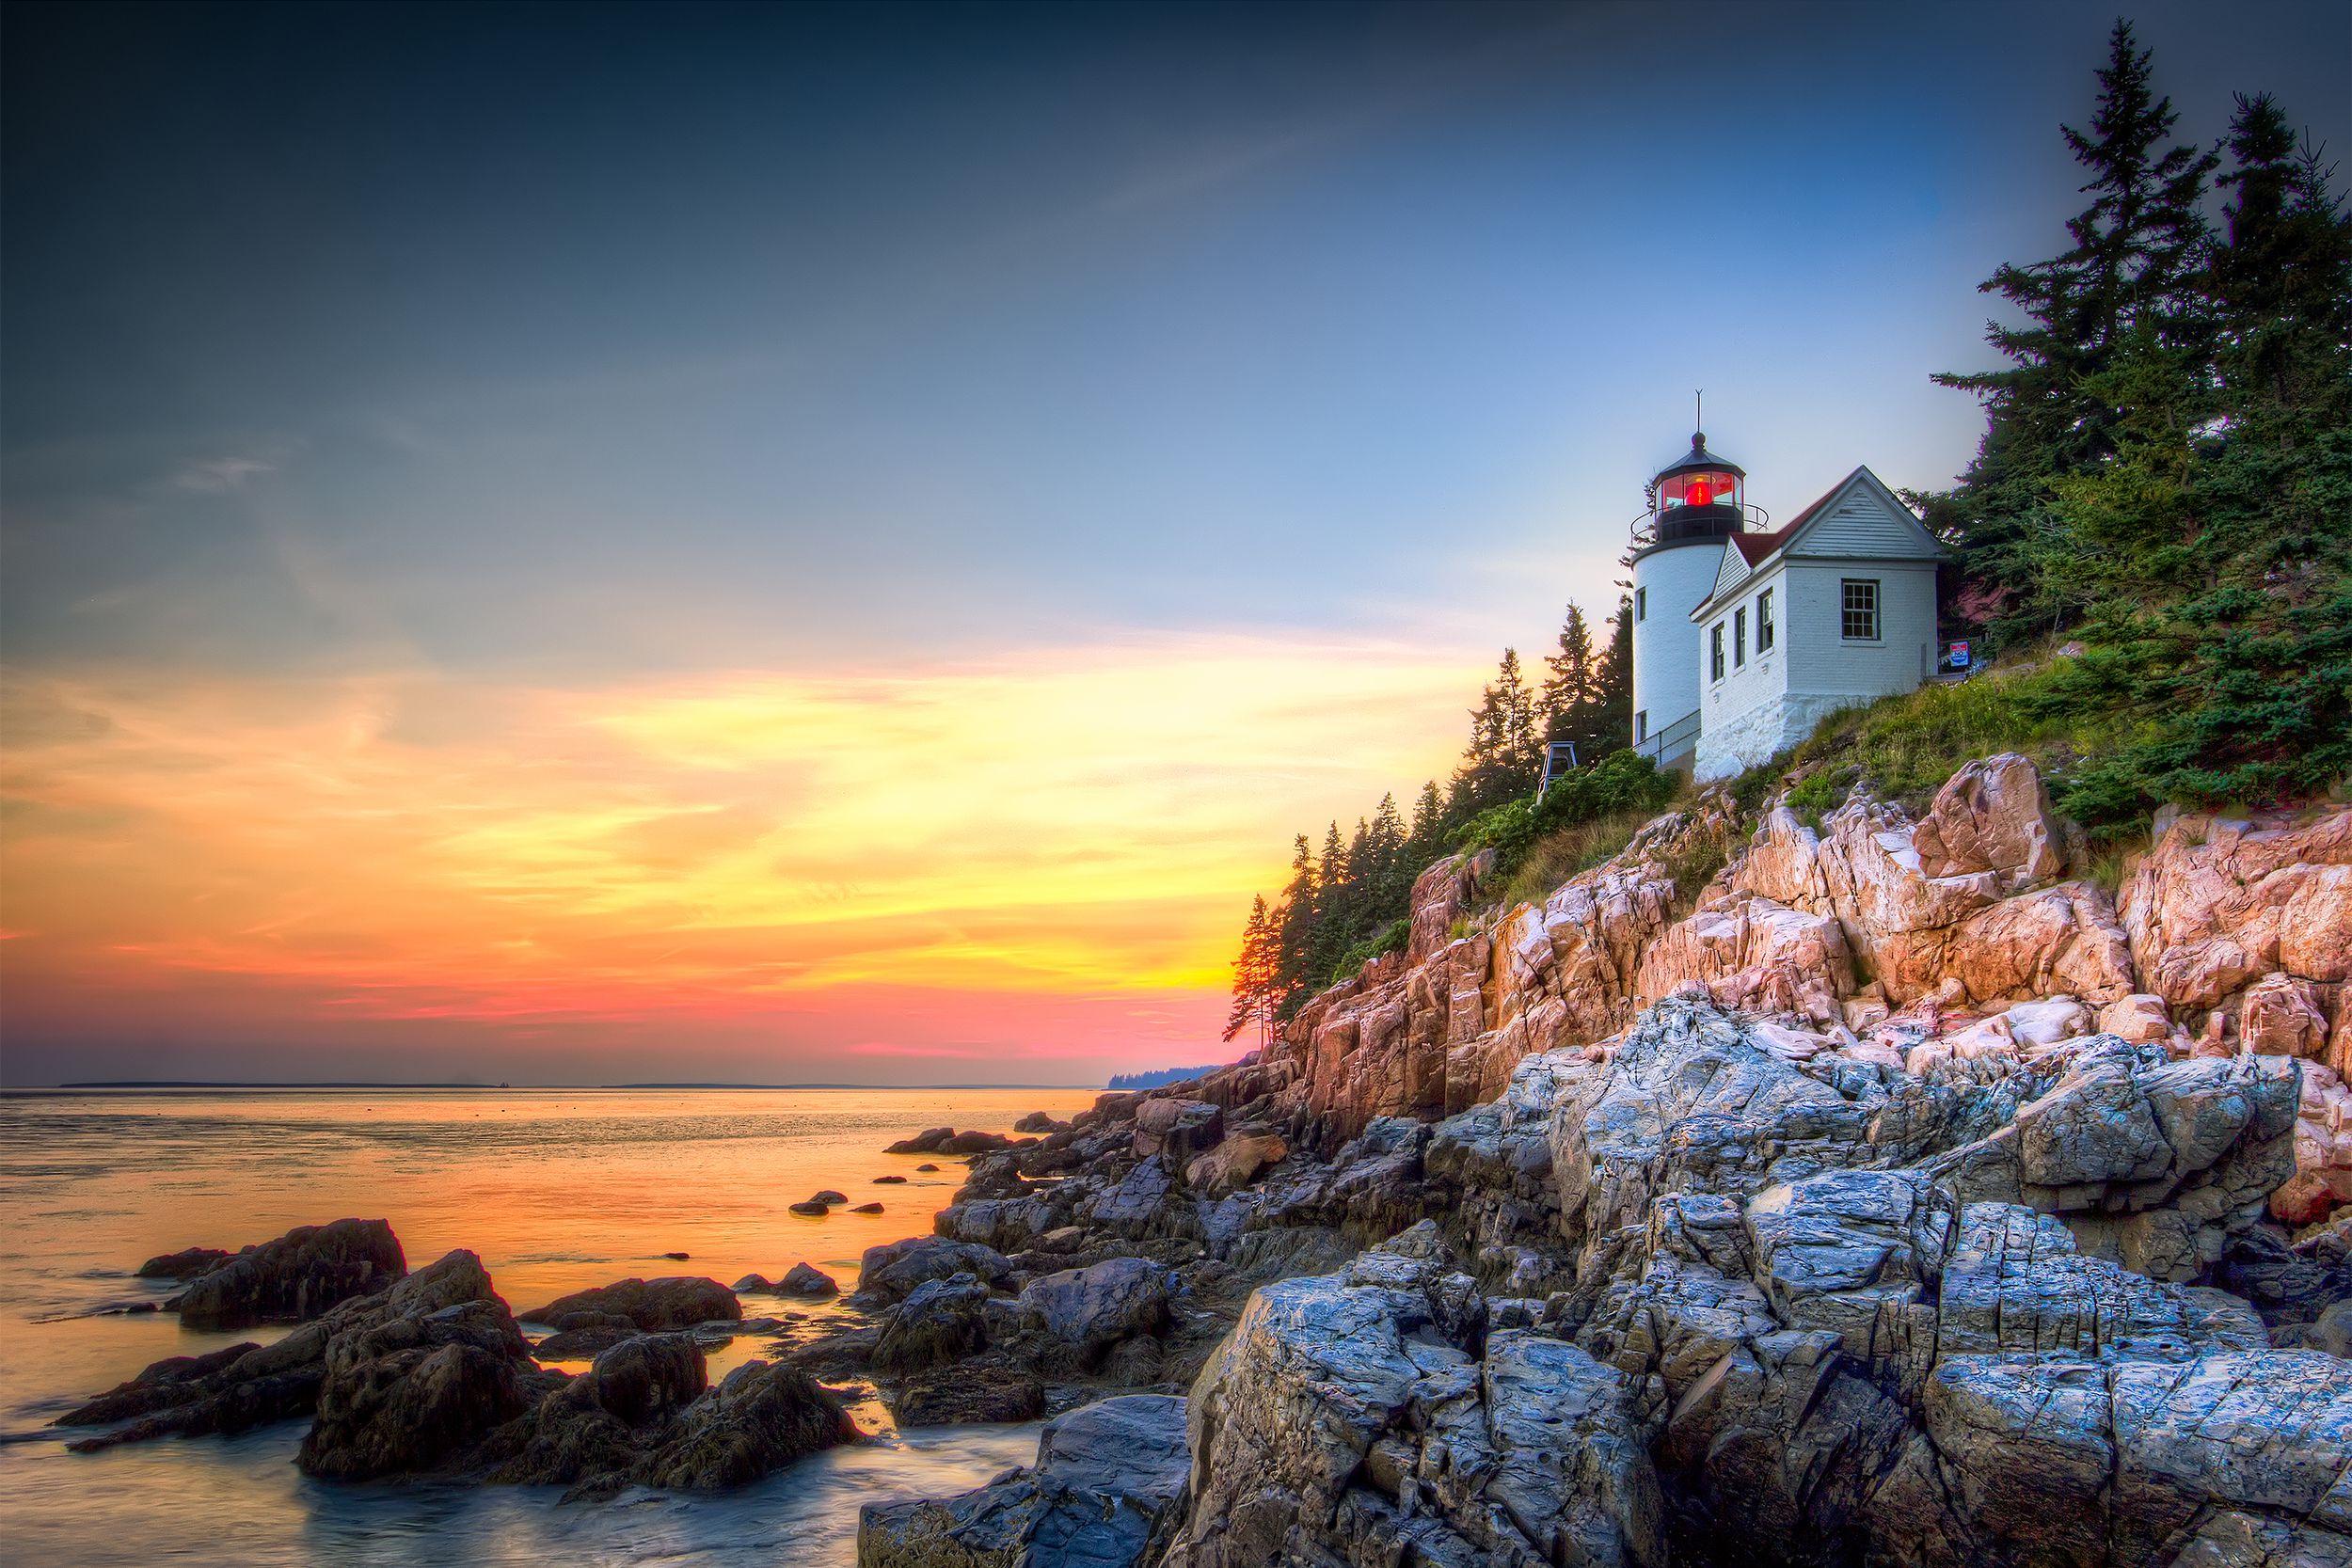 <p>One of the most stunning places to visit in the Northeast, <a href="https://www.nps.gov/acad/index.htm">Acadia National Park</a> spans ocean shoreline, coastal forests, remote islands and rocky mountains. There are 45 miles of historic carriage roads where visitors can set off on bikes and 125 miles of trails for hiking enthusiasts. </p>